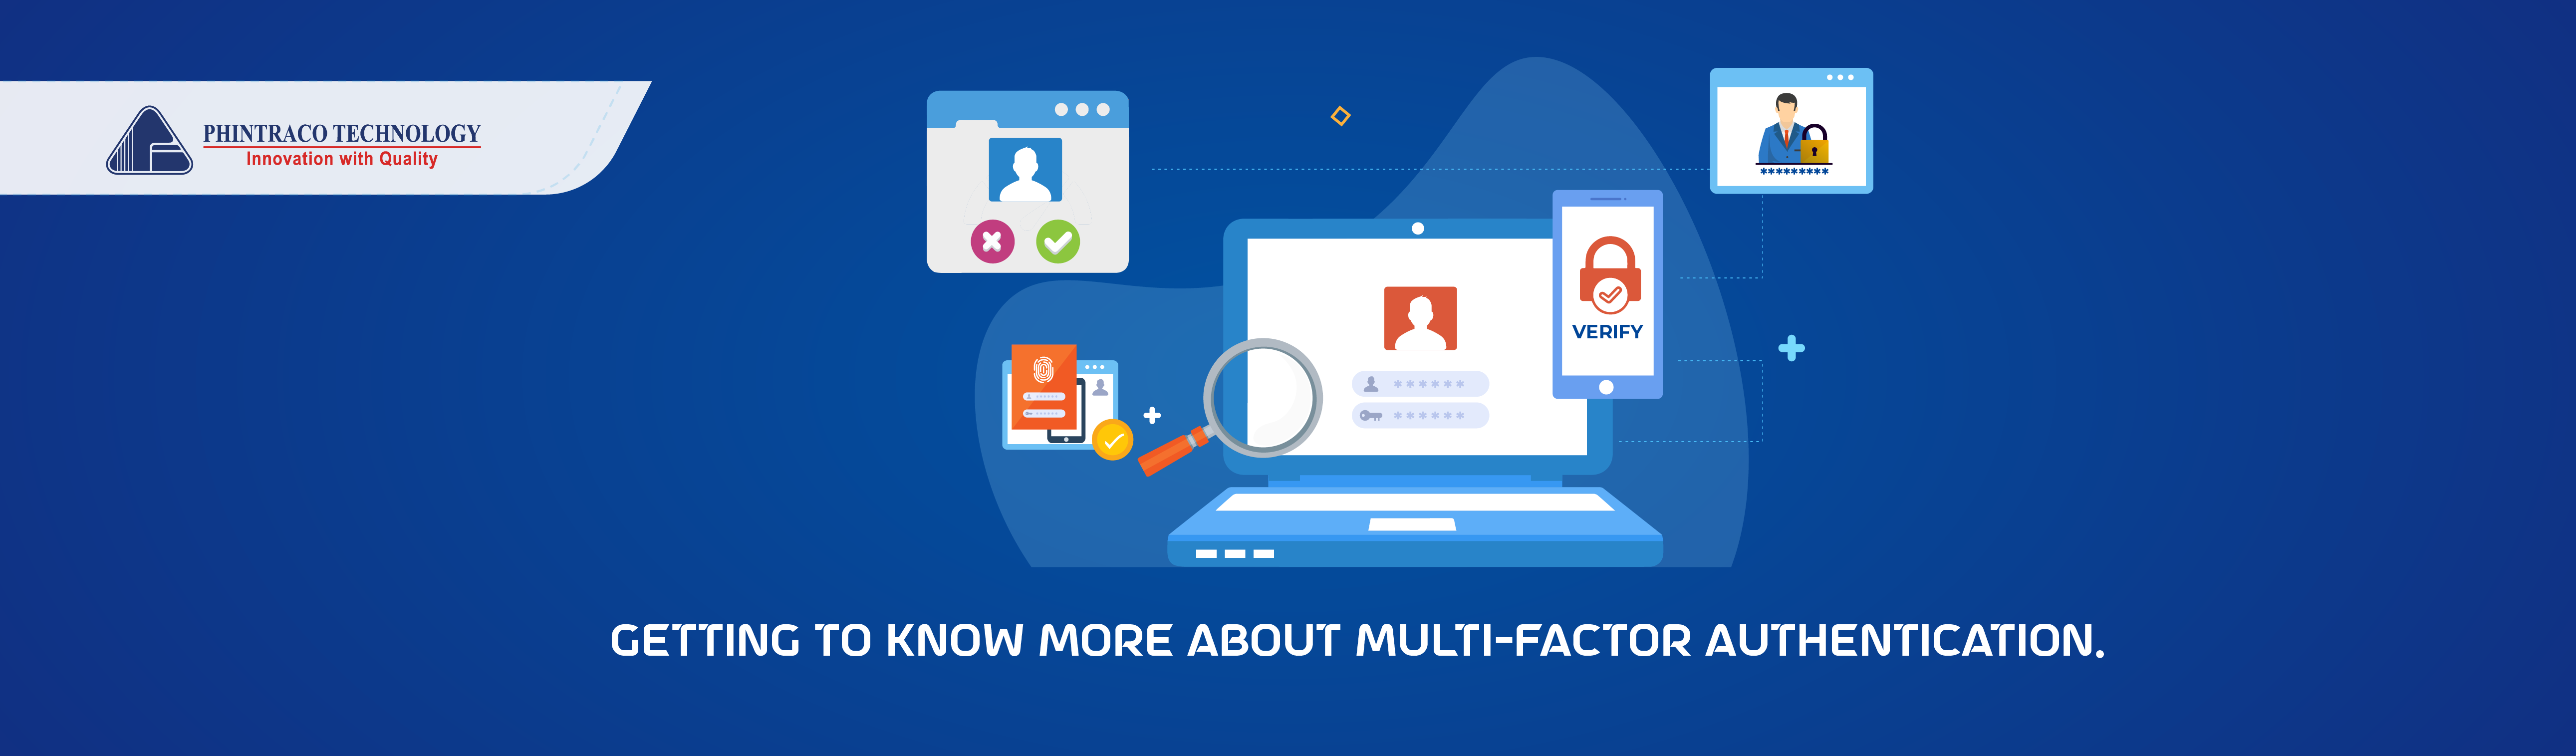 Getting to know more about Multi-Factor Authentication